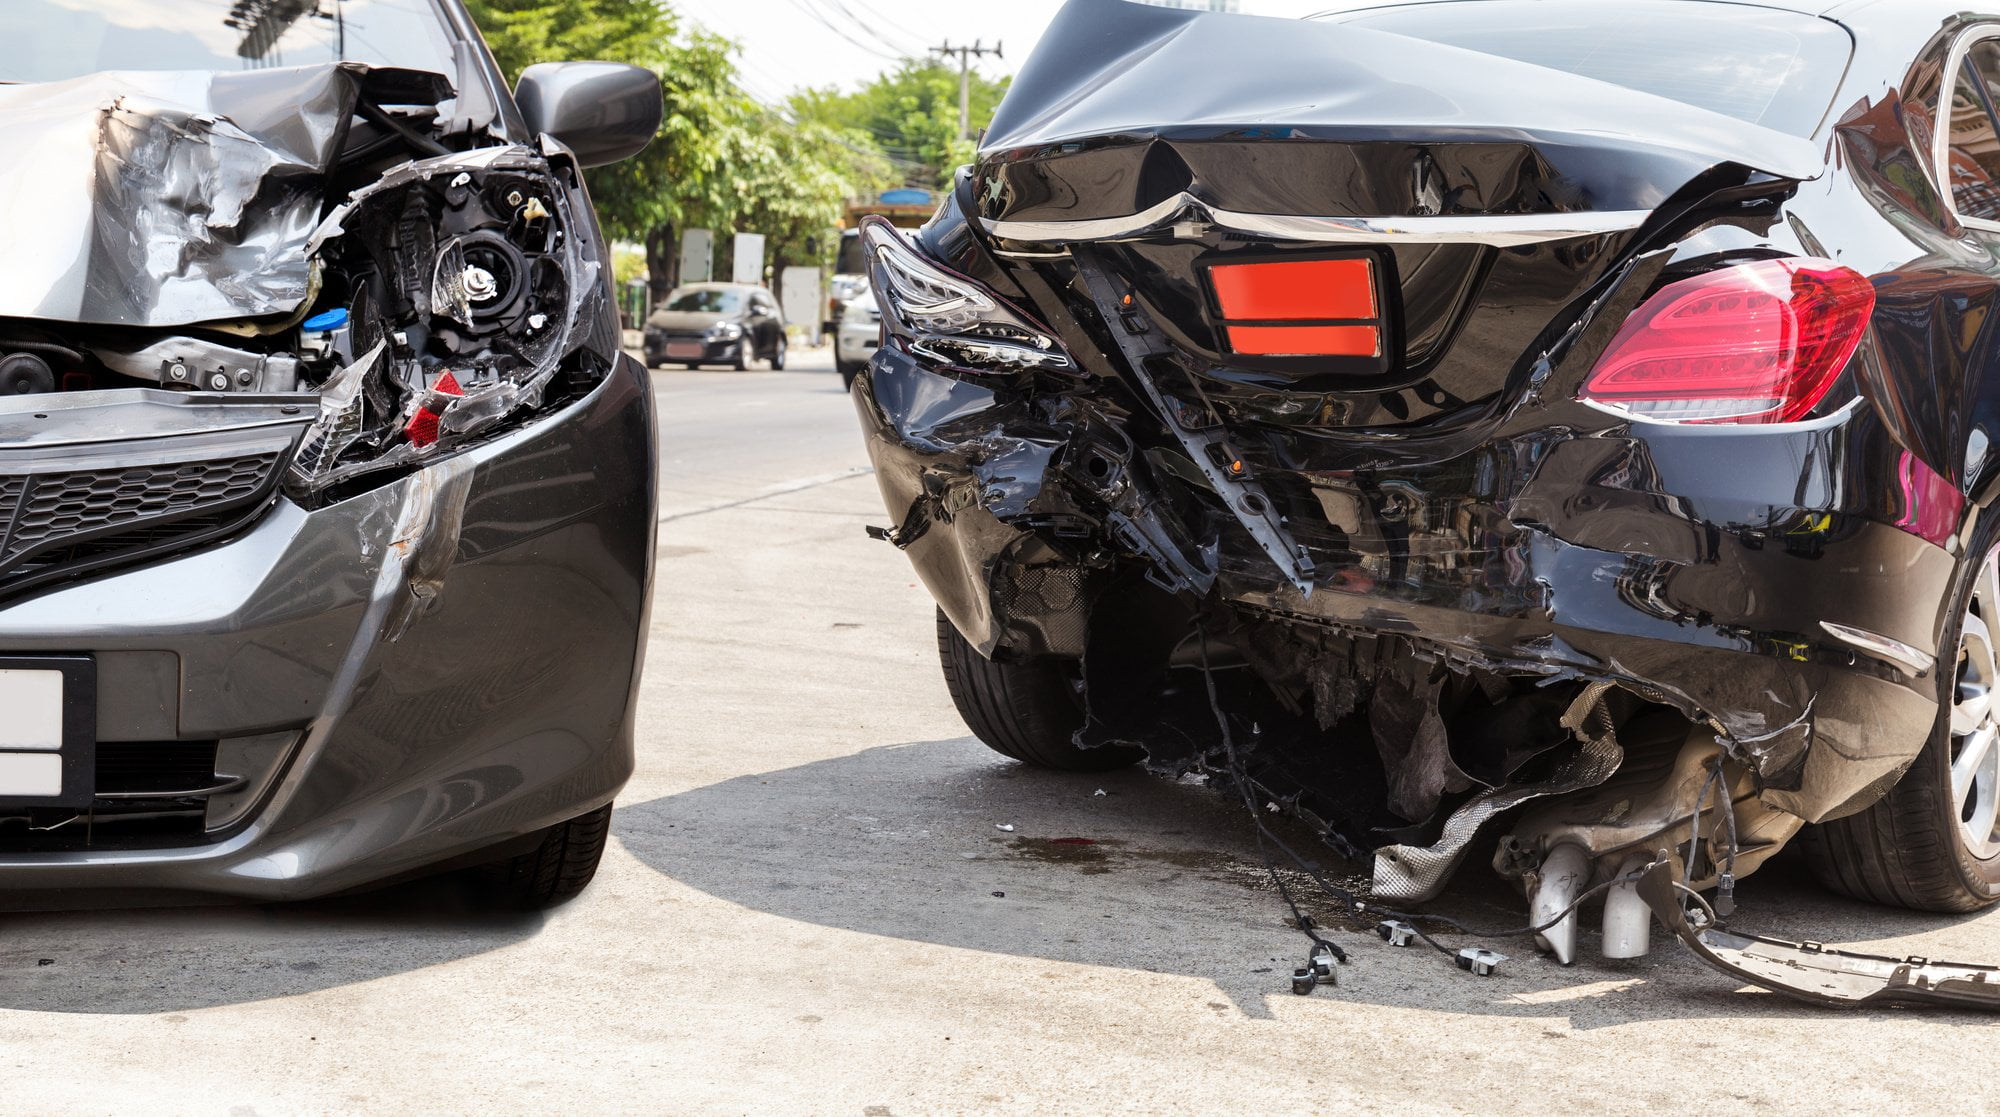 What should you do after a vehicle accident and who are the best providers of assistance after a crash? Check out our guide to learn more today.